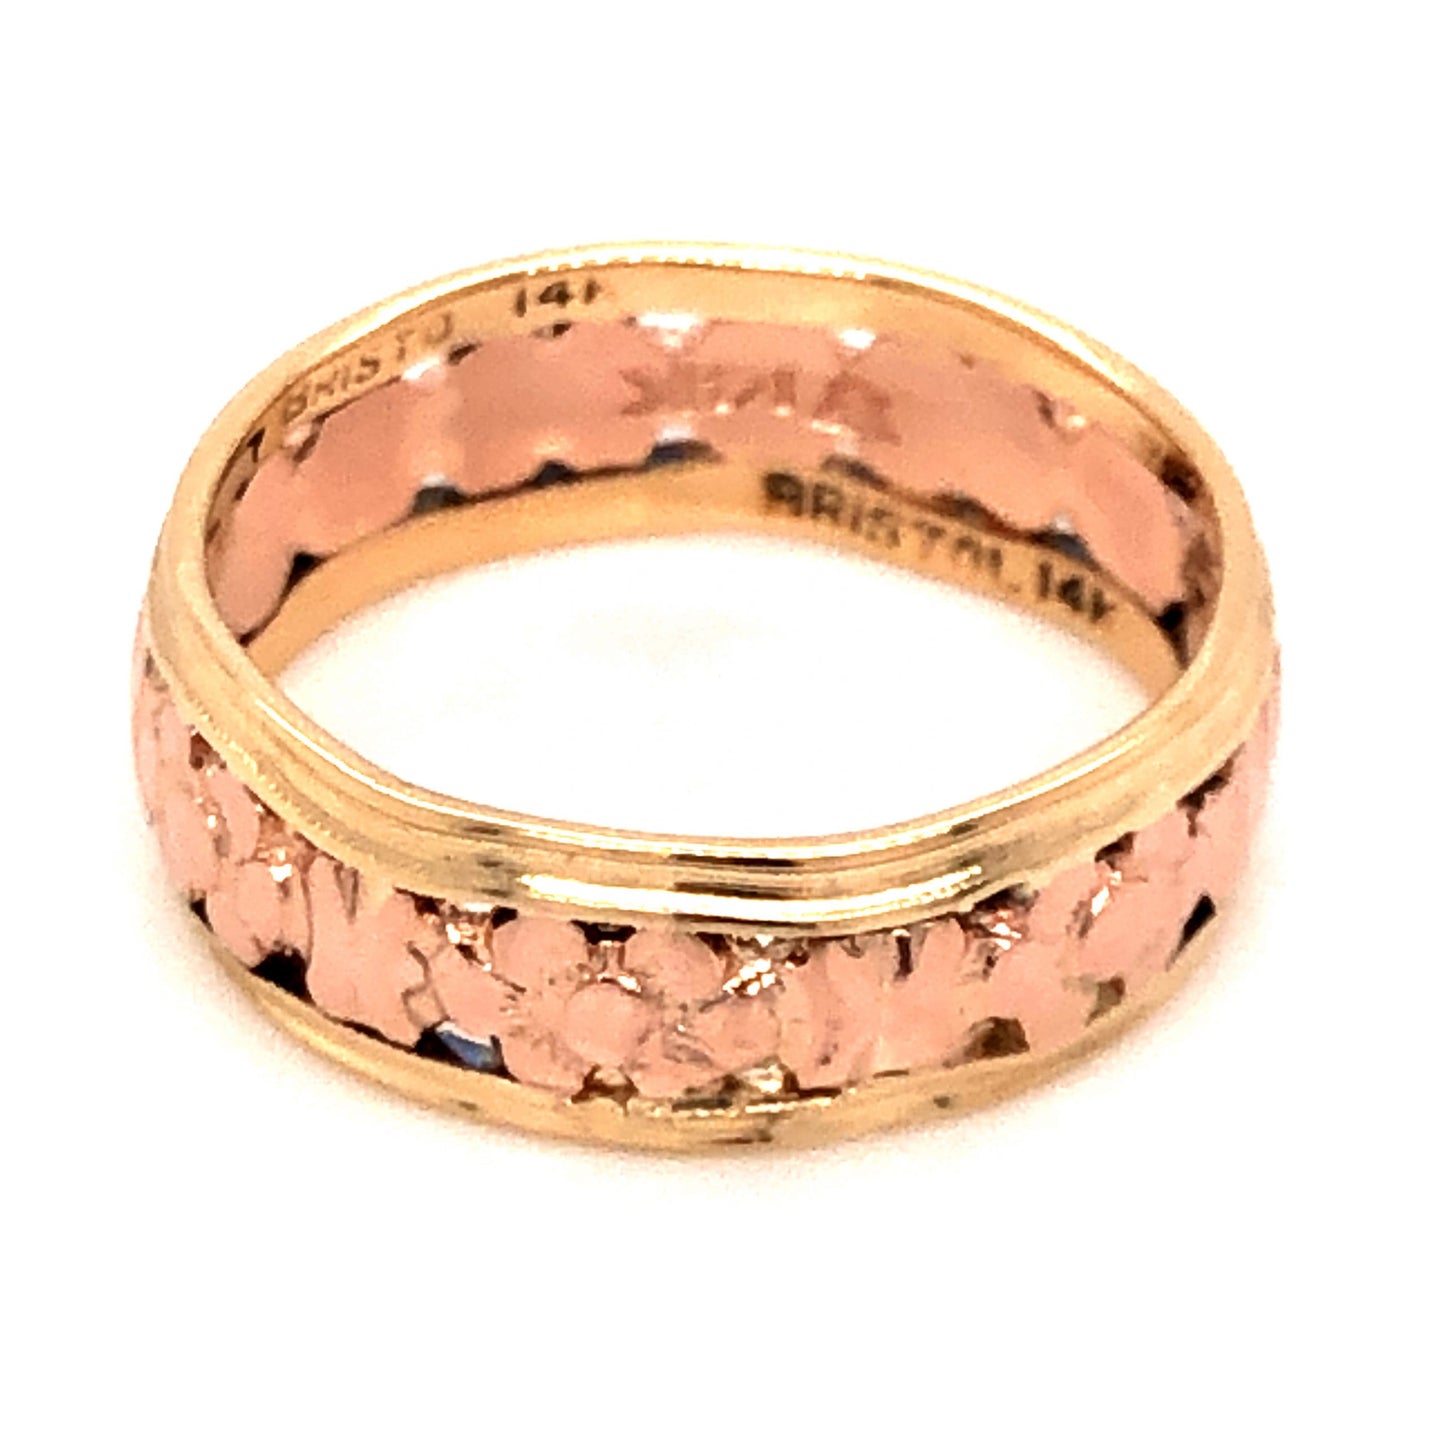 Wide Mid-Century Wedding Band in 14k Yellow and Rose Gold